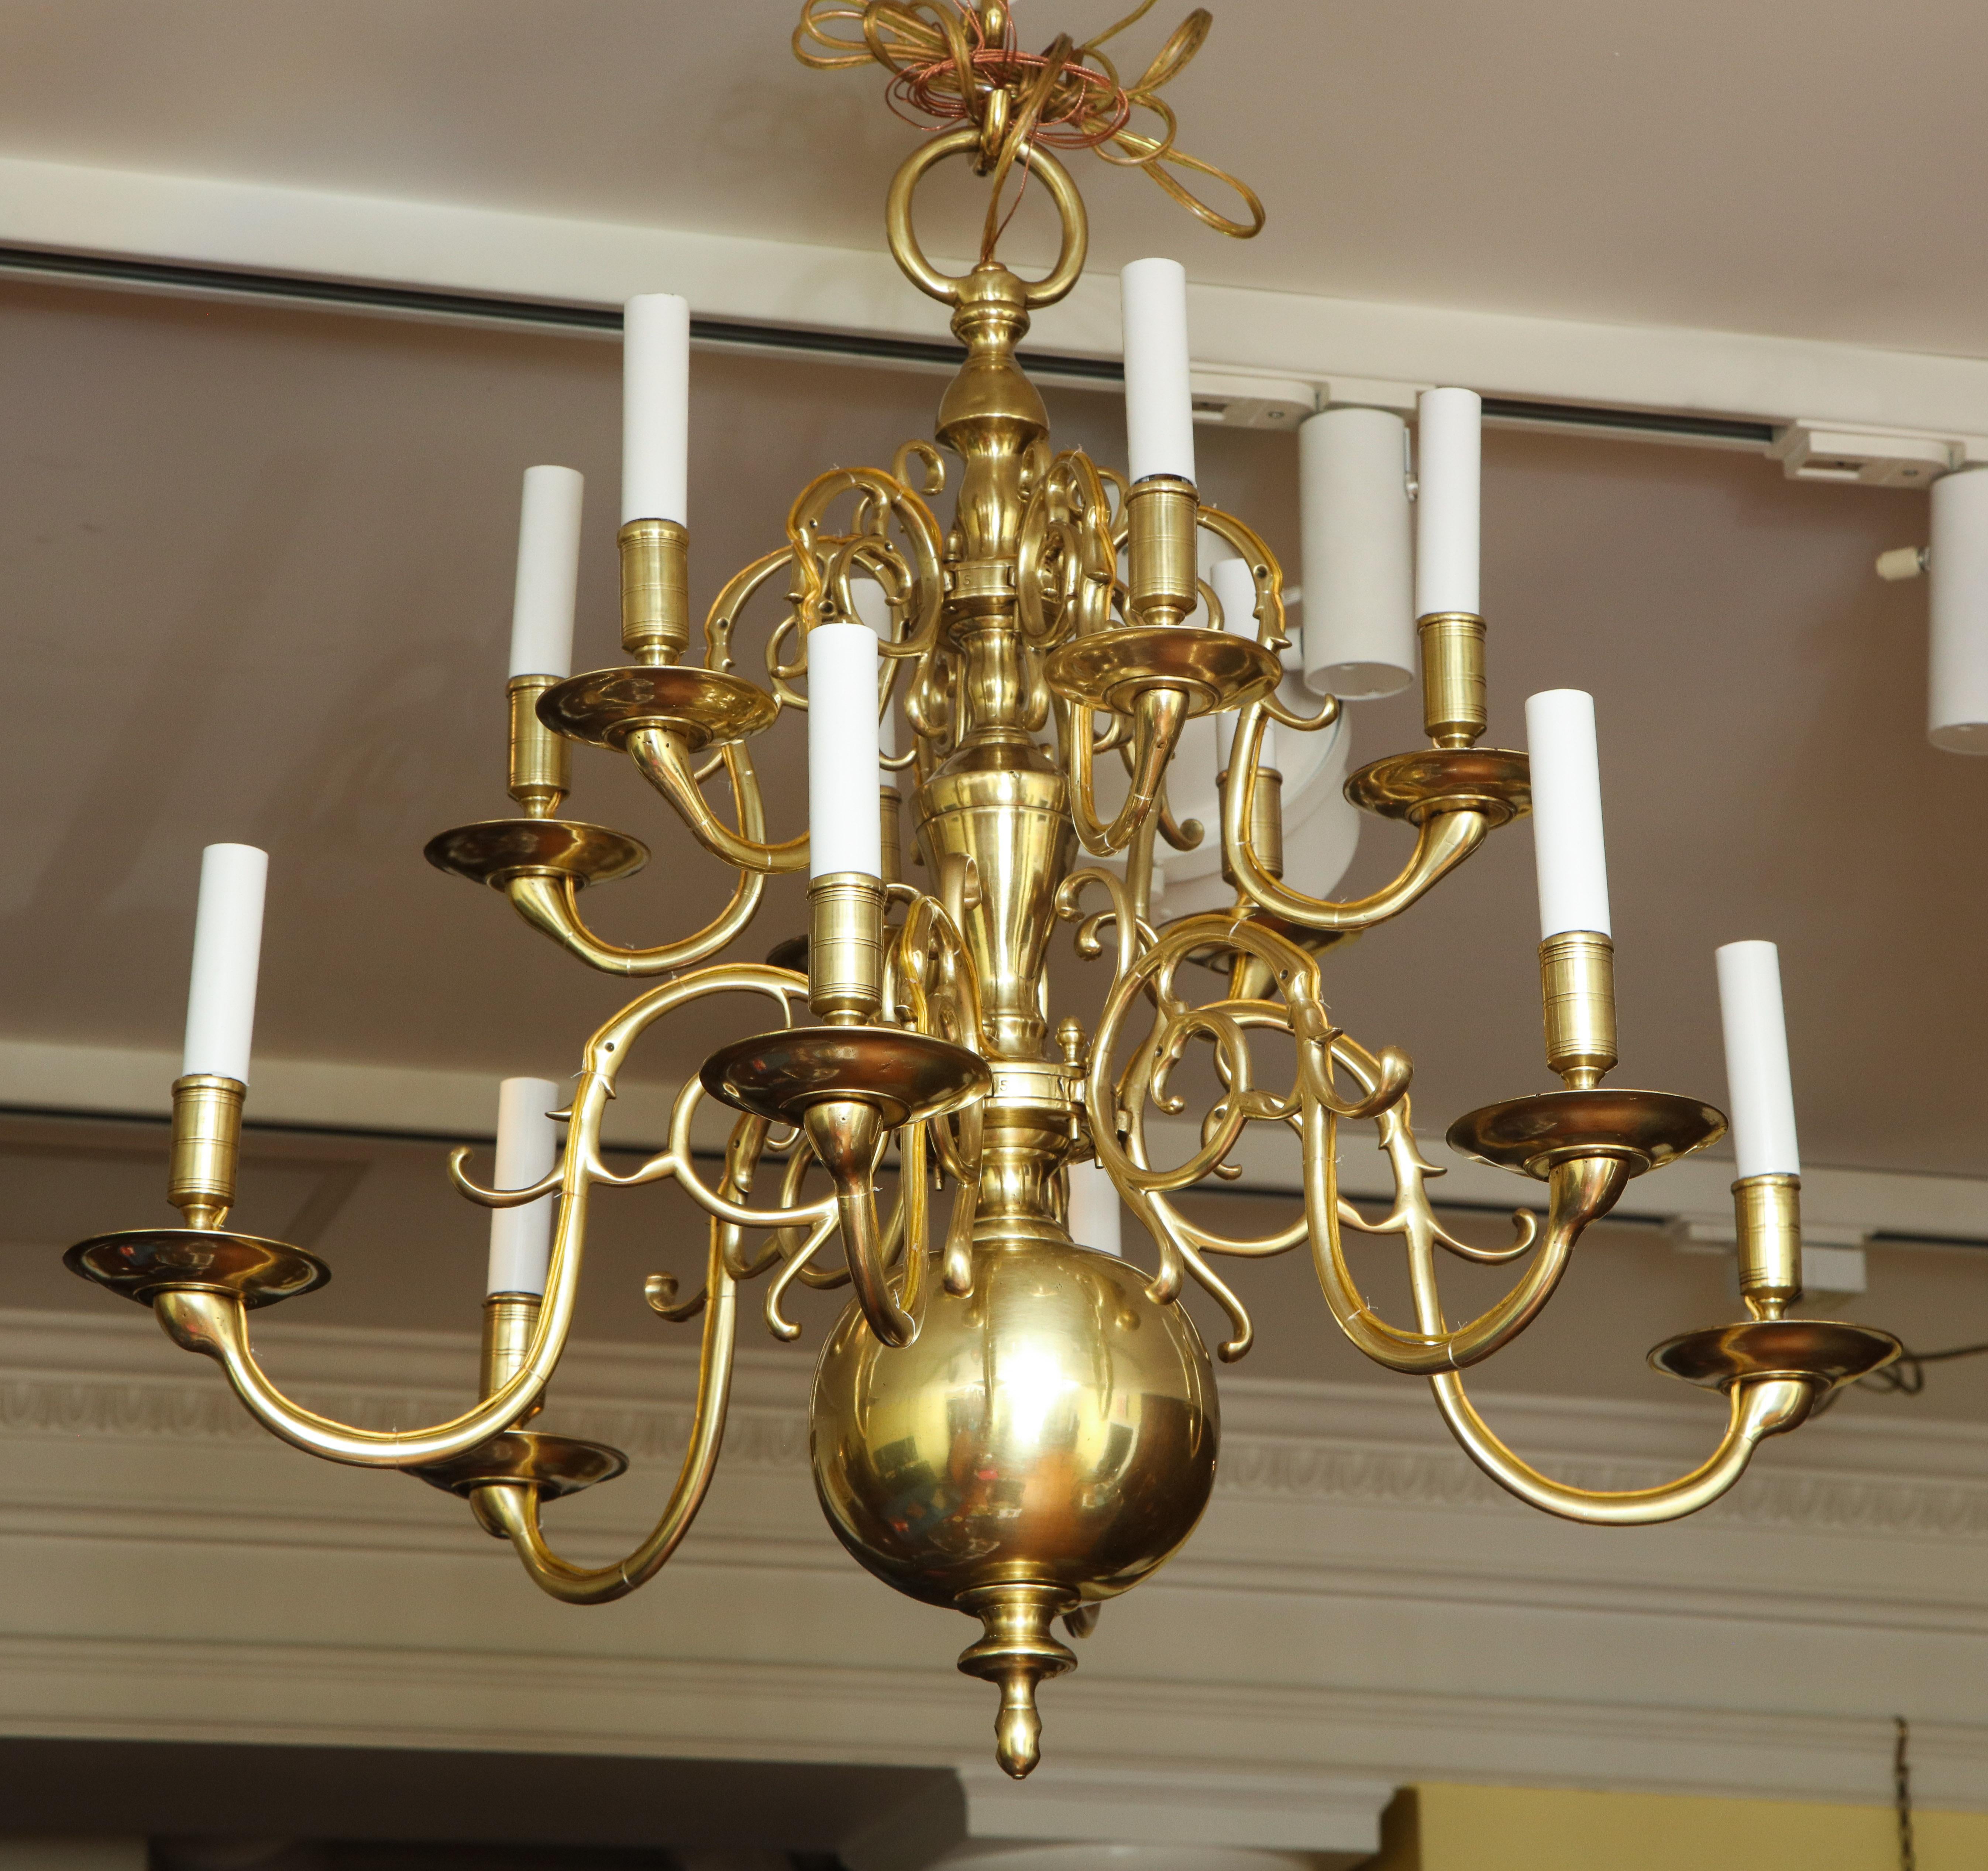 Cast Antique Brass 12-Light Scrolled Arm Chandelier with Large Lower Ball, circa 1850 For Sale